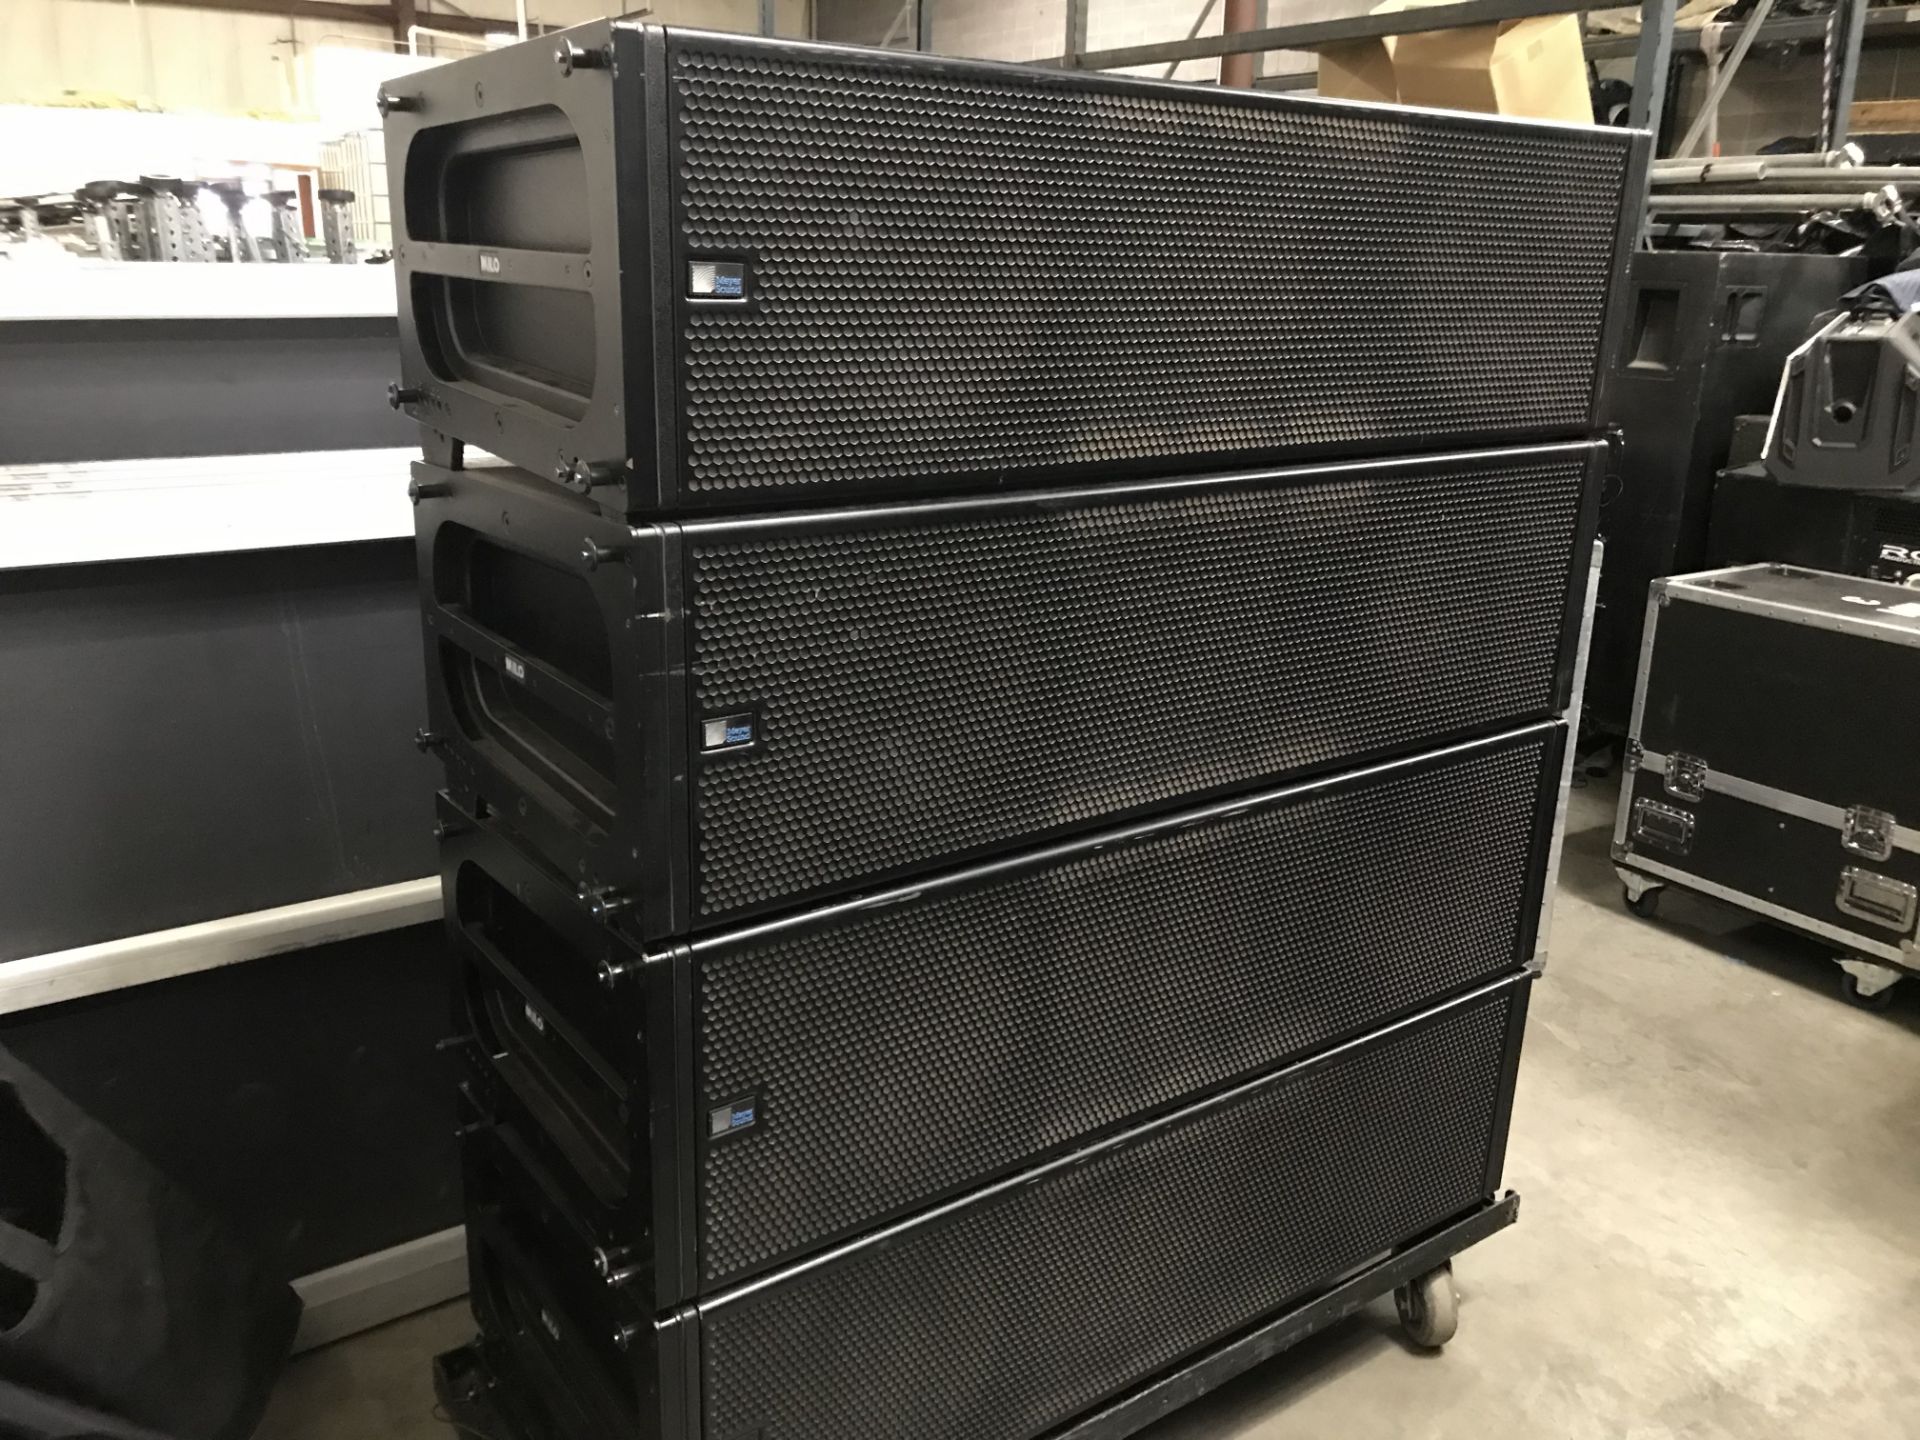 LOT OF: (4) MEYER SOUND, MILO HP MONITORS W/ ROLLING CART AND (1) 43" X 54" STEEL FRAME GROUNDSTACK - Image 4 of 12